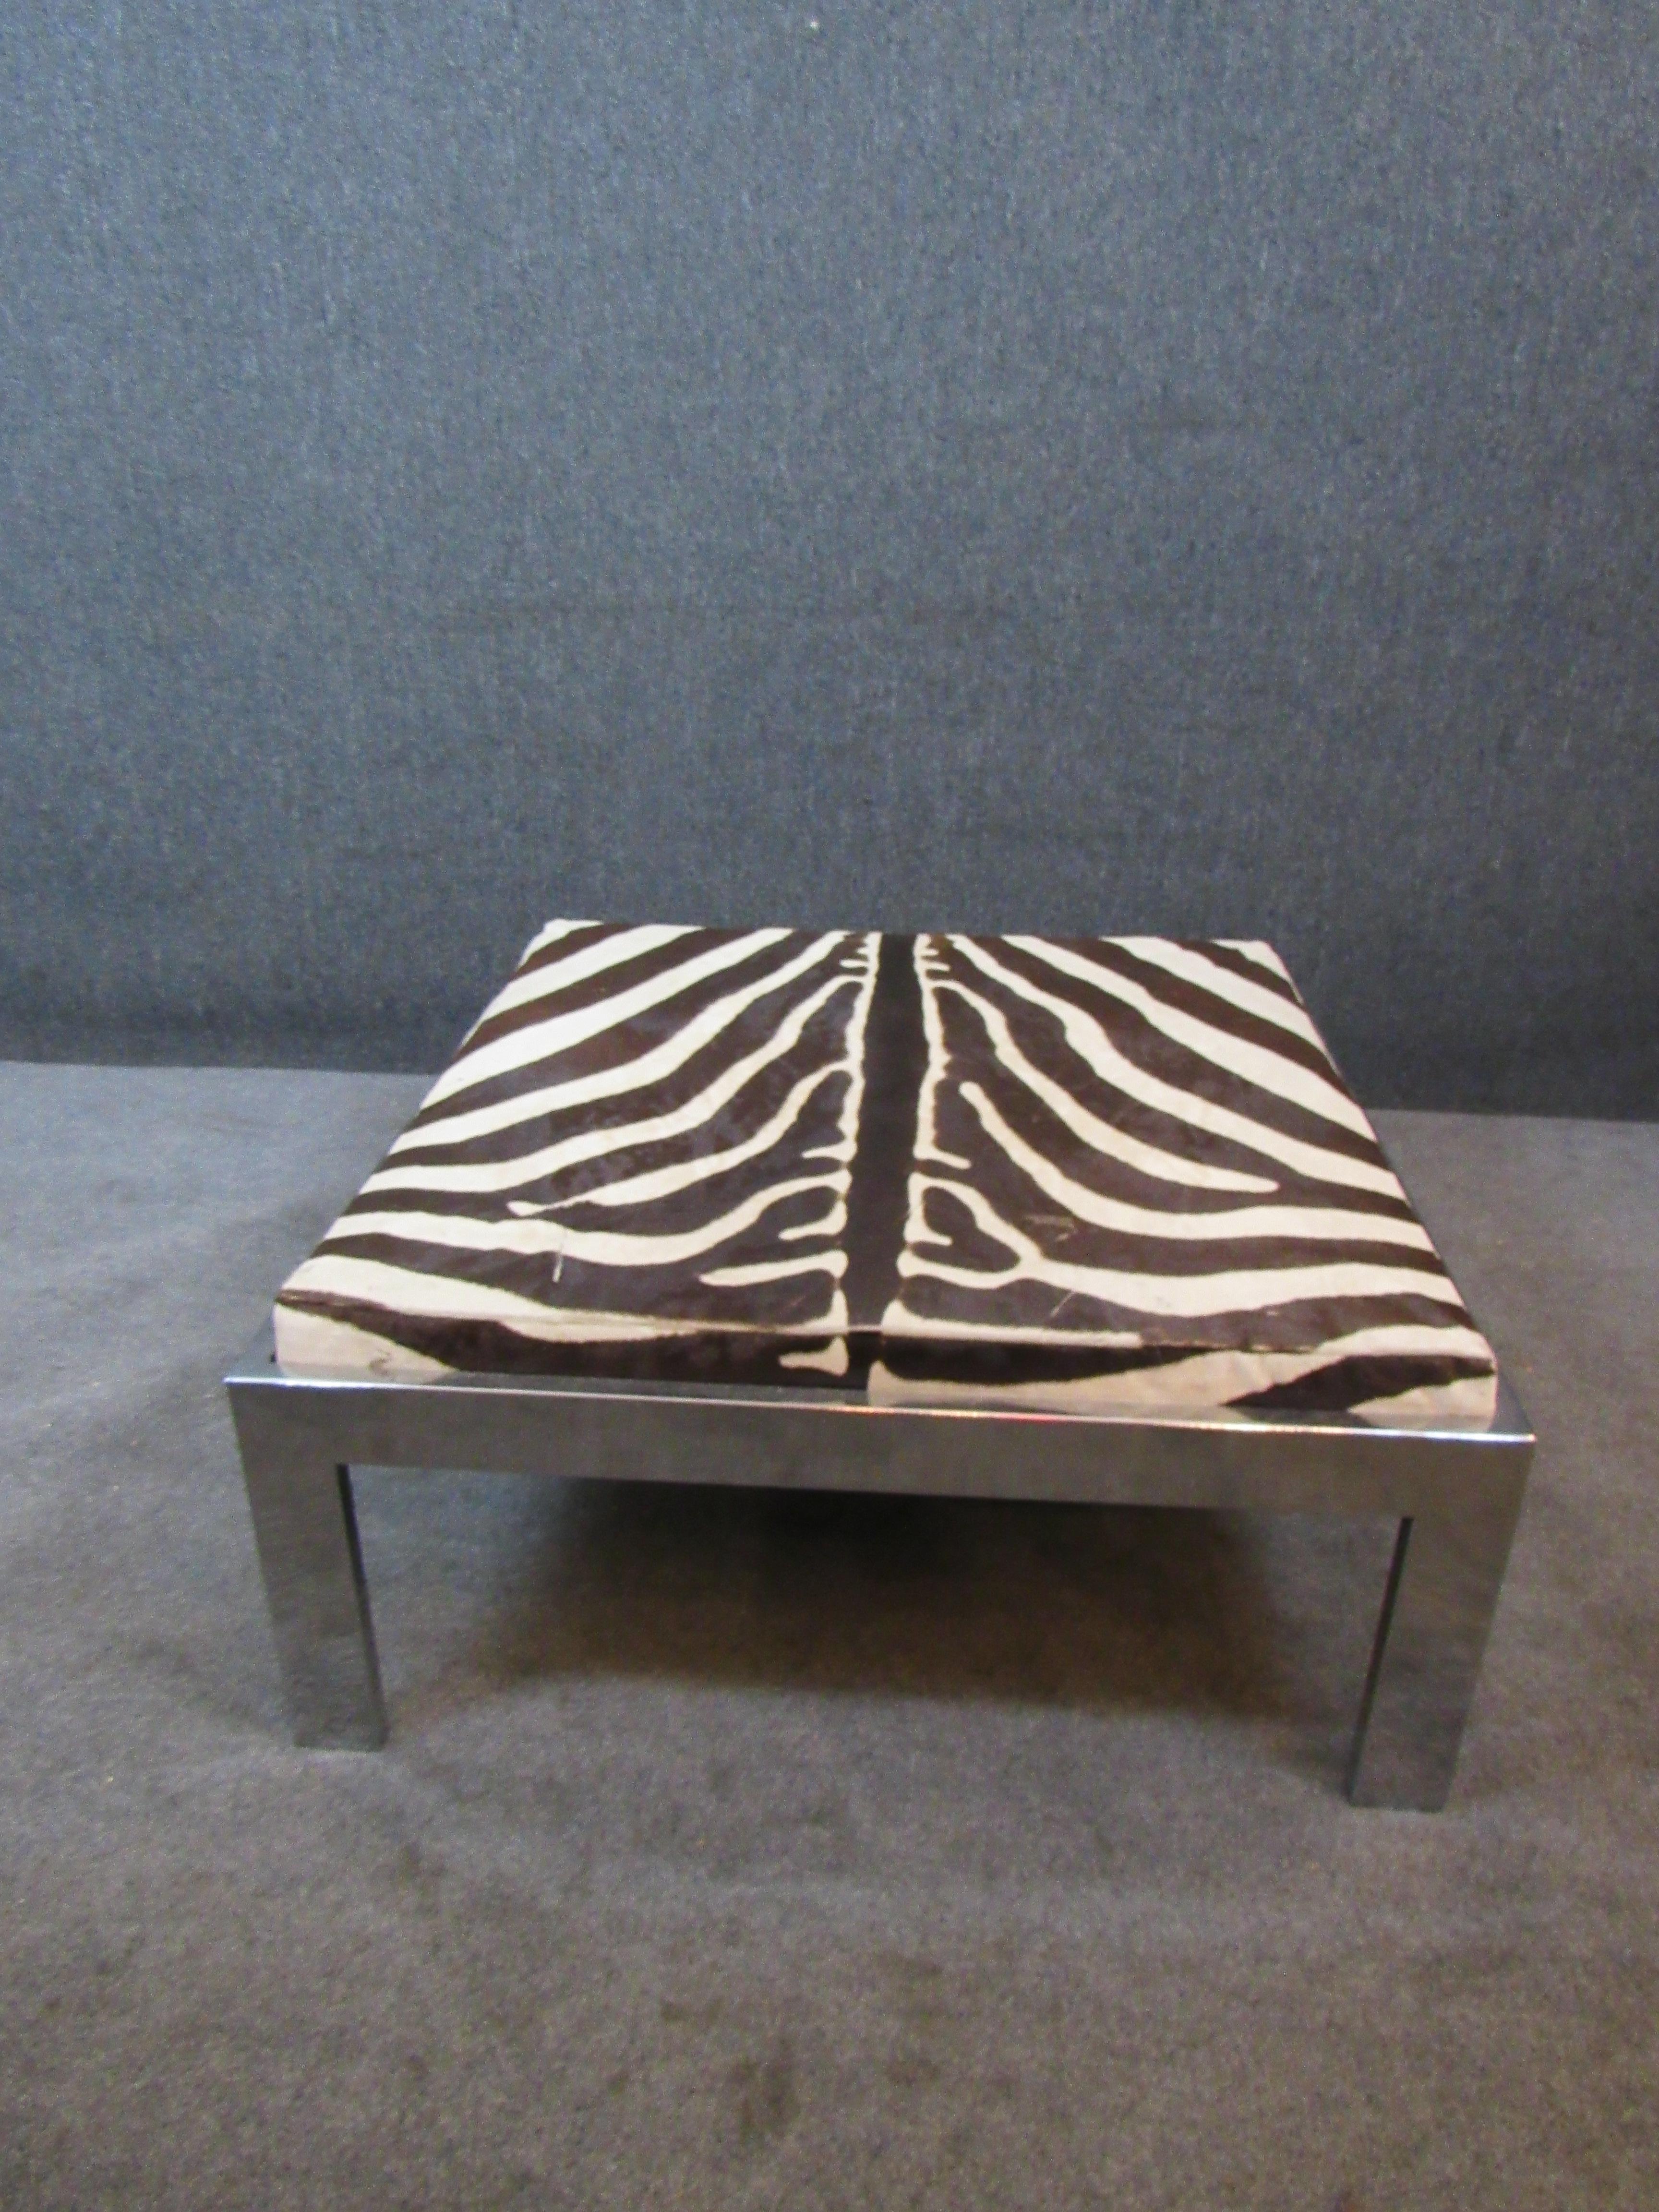 Kick back and sprawl out on this fantastically unique funky vintage jumbo zebra ottoman! With over 10 square feet of real hide upholstery, this piece truly brings home the excitement of the safari into the comfort of your living room! A shiny and